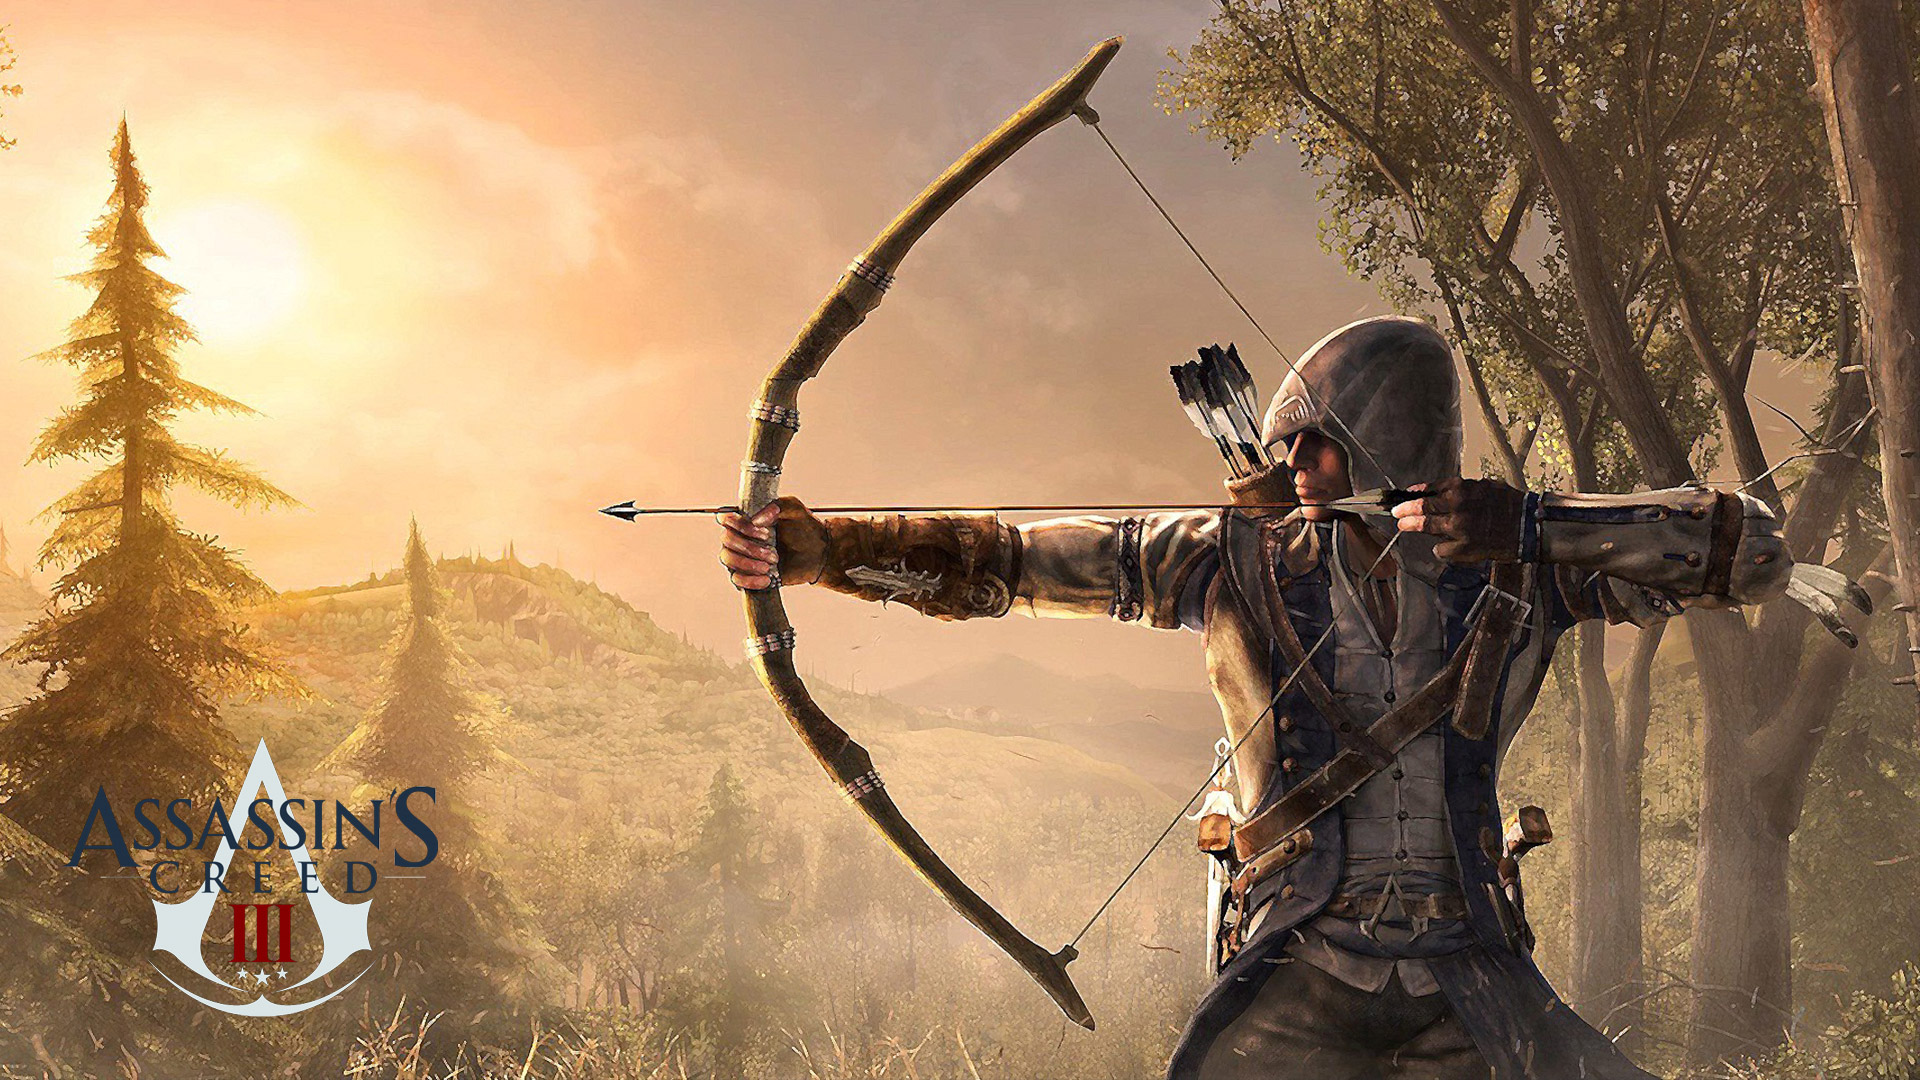 Wallpaper Assassin S Creed Iii Geekeries Back To The Geek